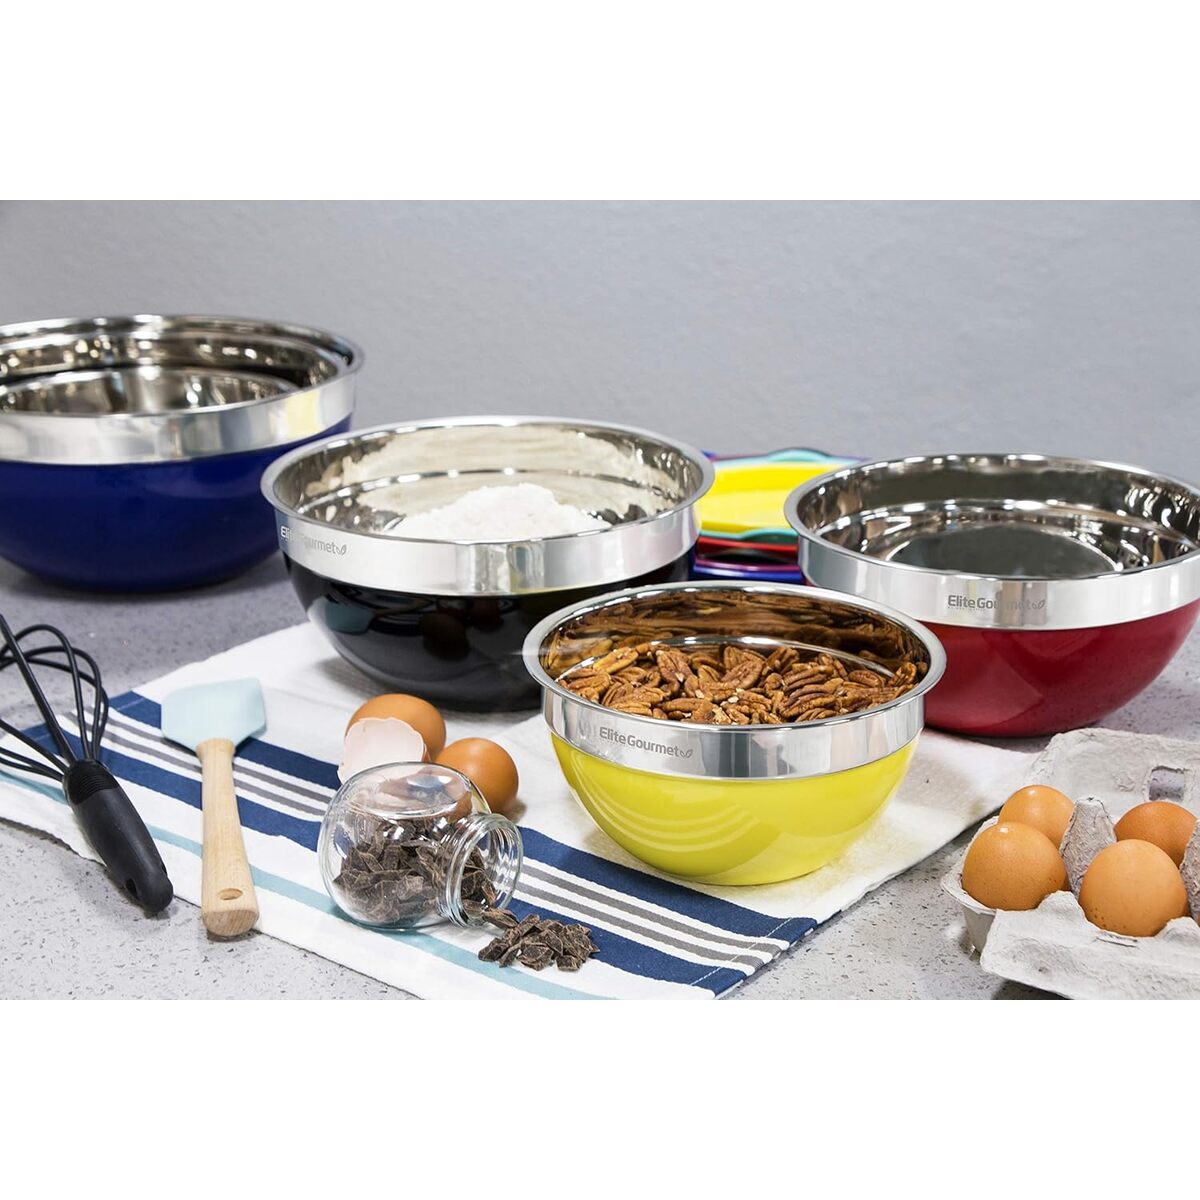 Elite Gourmet 12 pc Colored Mixing Bowls